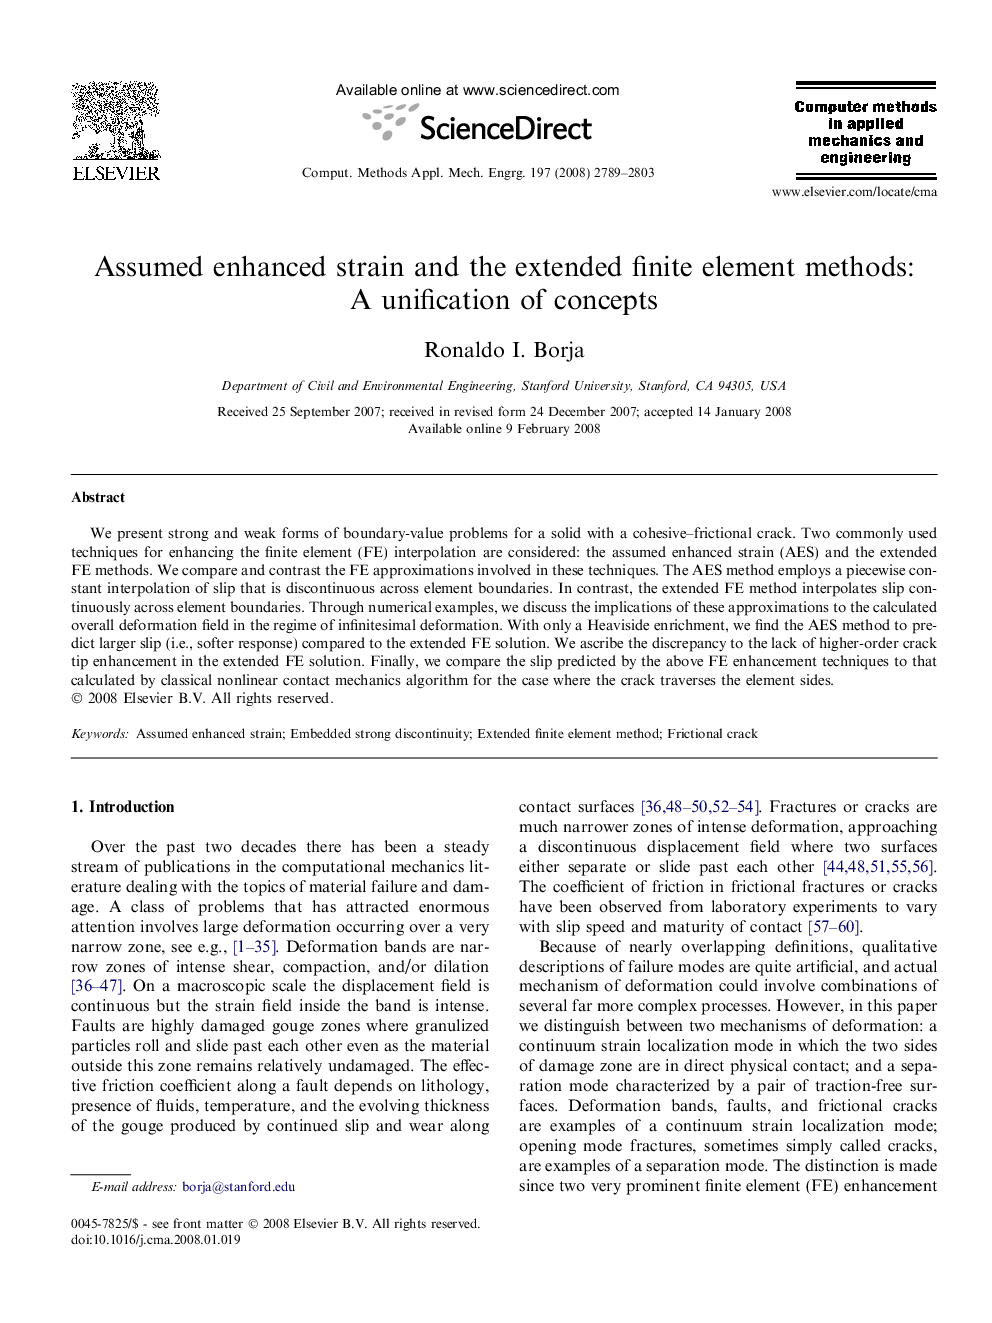 Assumed enhanced strain and the extended finite element methods: A unification of concepts